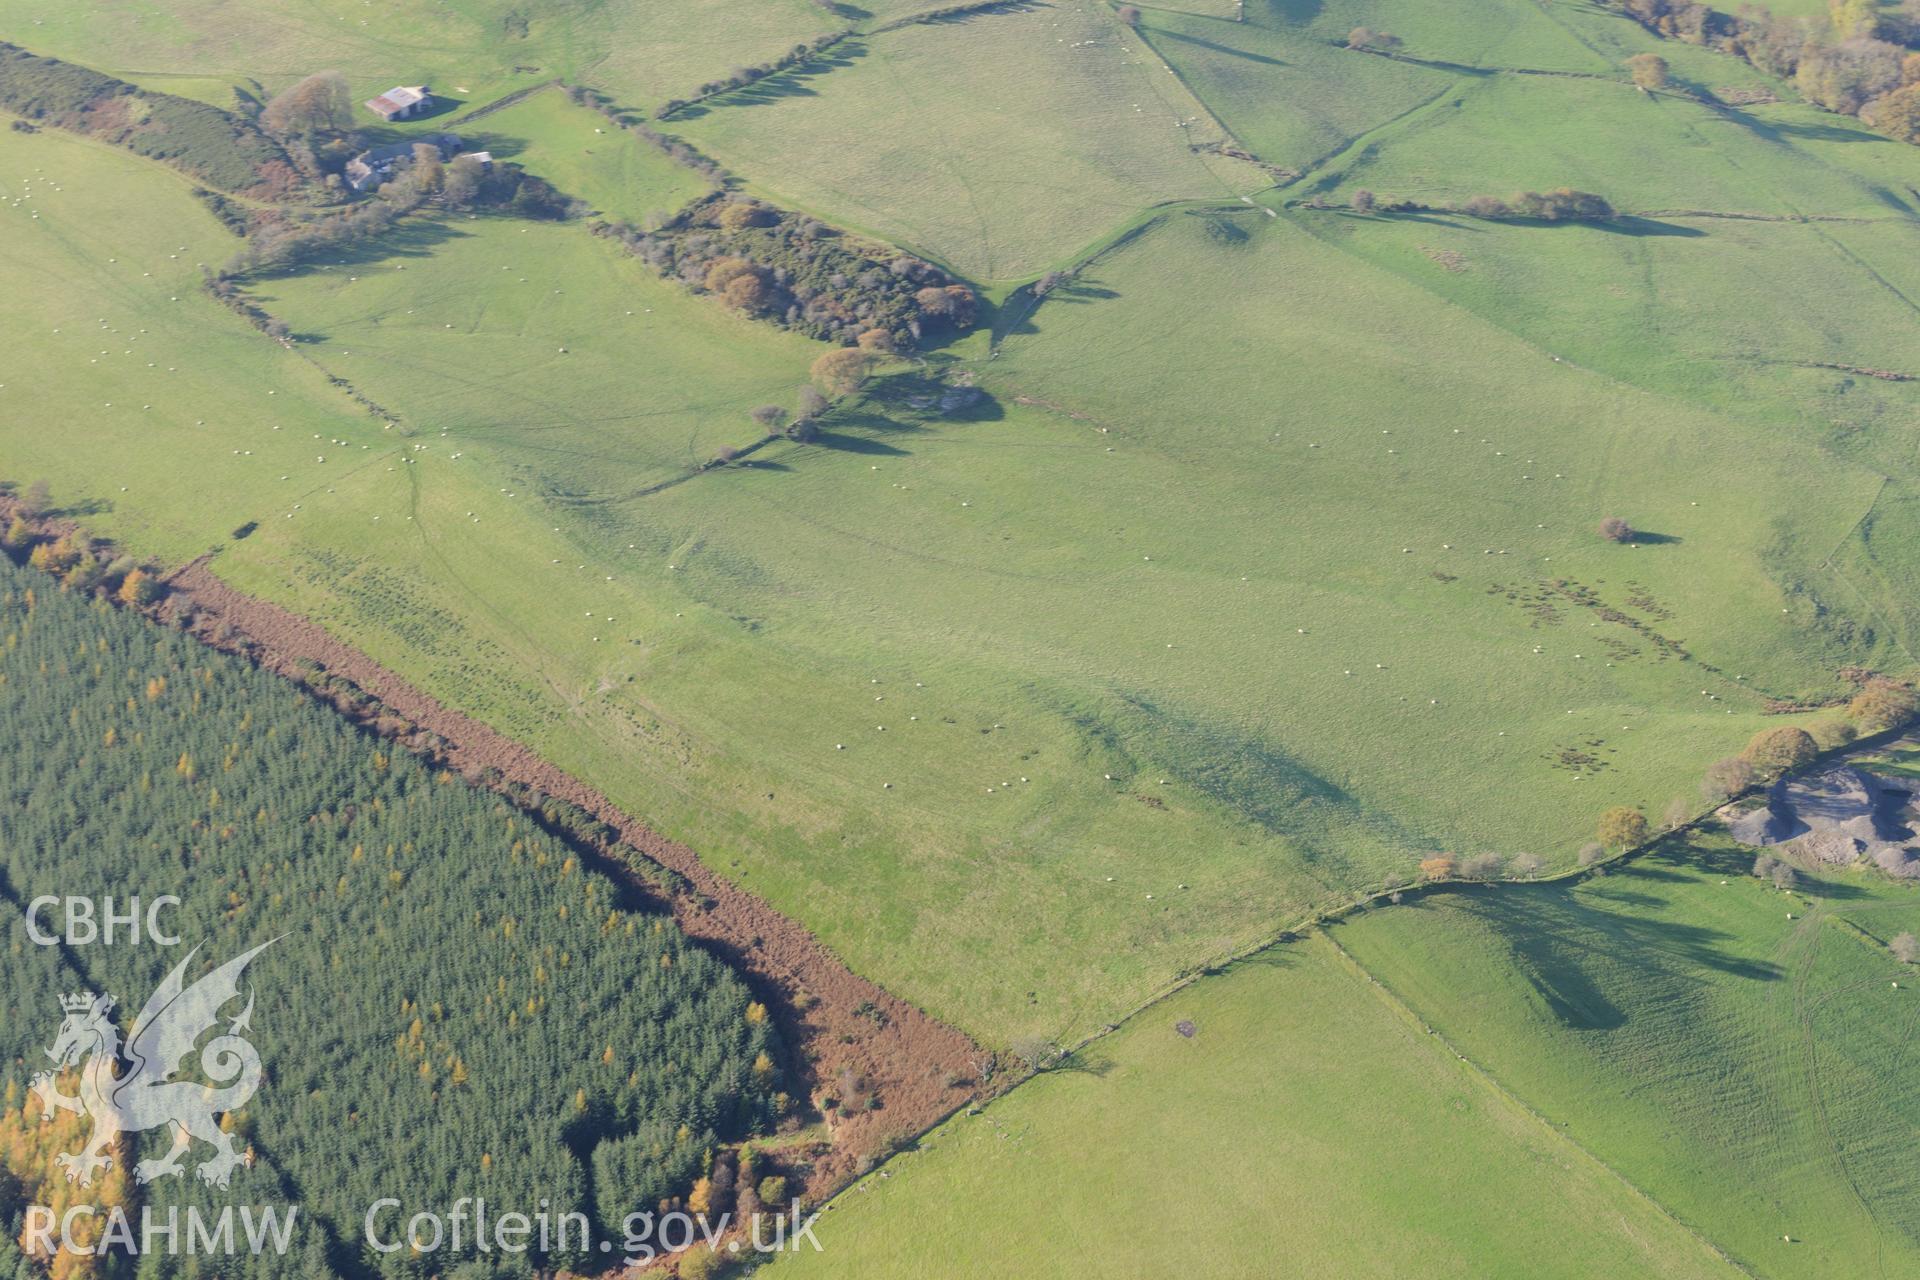 Pen-y-Gaer defended enclosure or hillfort, Bank Green Grove near Ystrad Aeron. Oblique aerial photograph taken during the Royal Commission's programme of archaeological aerial reconnaissance by Toby Driver on 2nd November 2015.